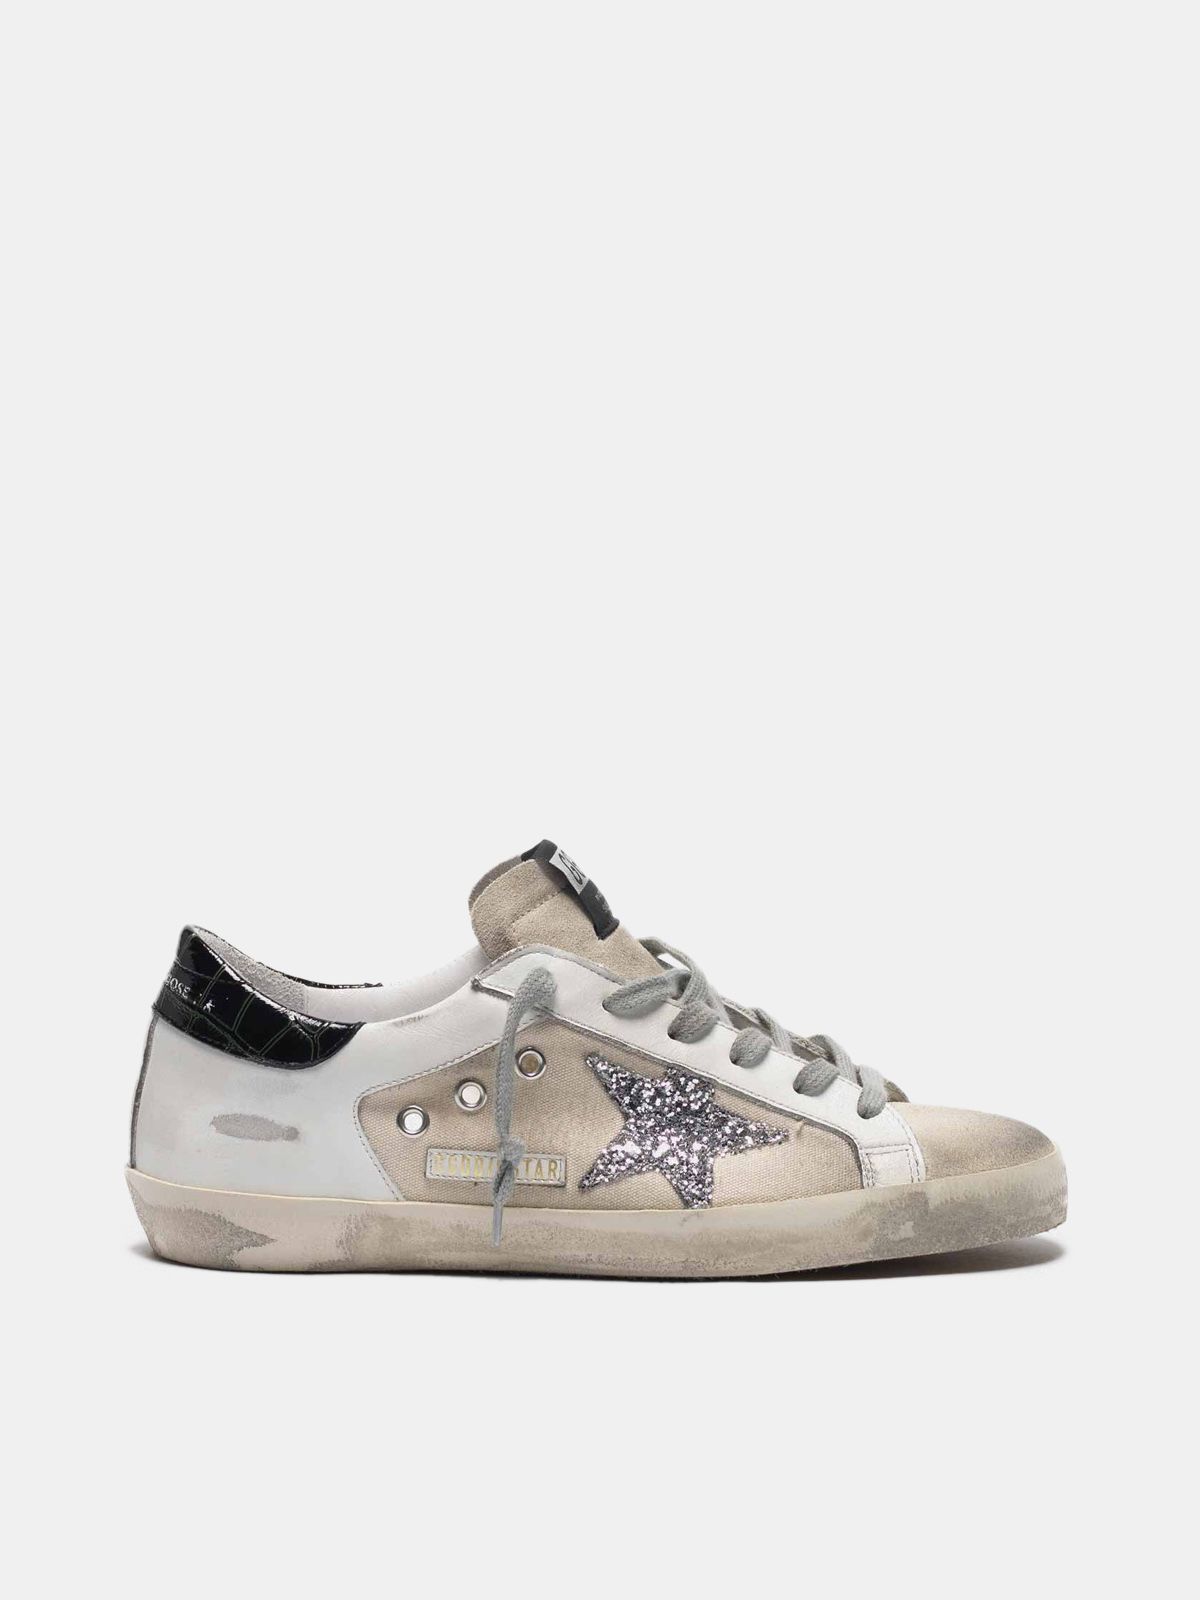 Sneakers Uomo Golden Goose Canvas Super-Star sneakers in leather with glittery star